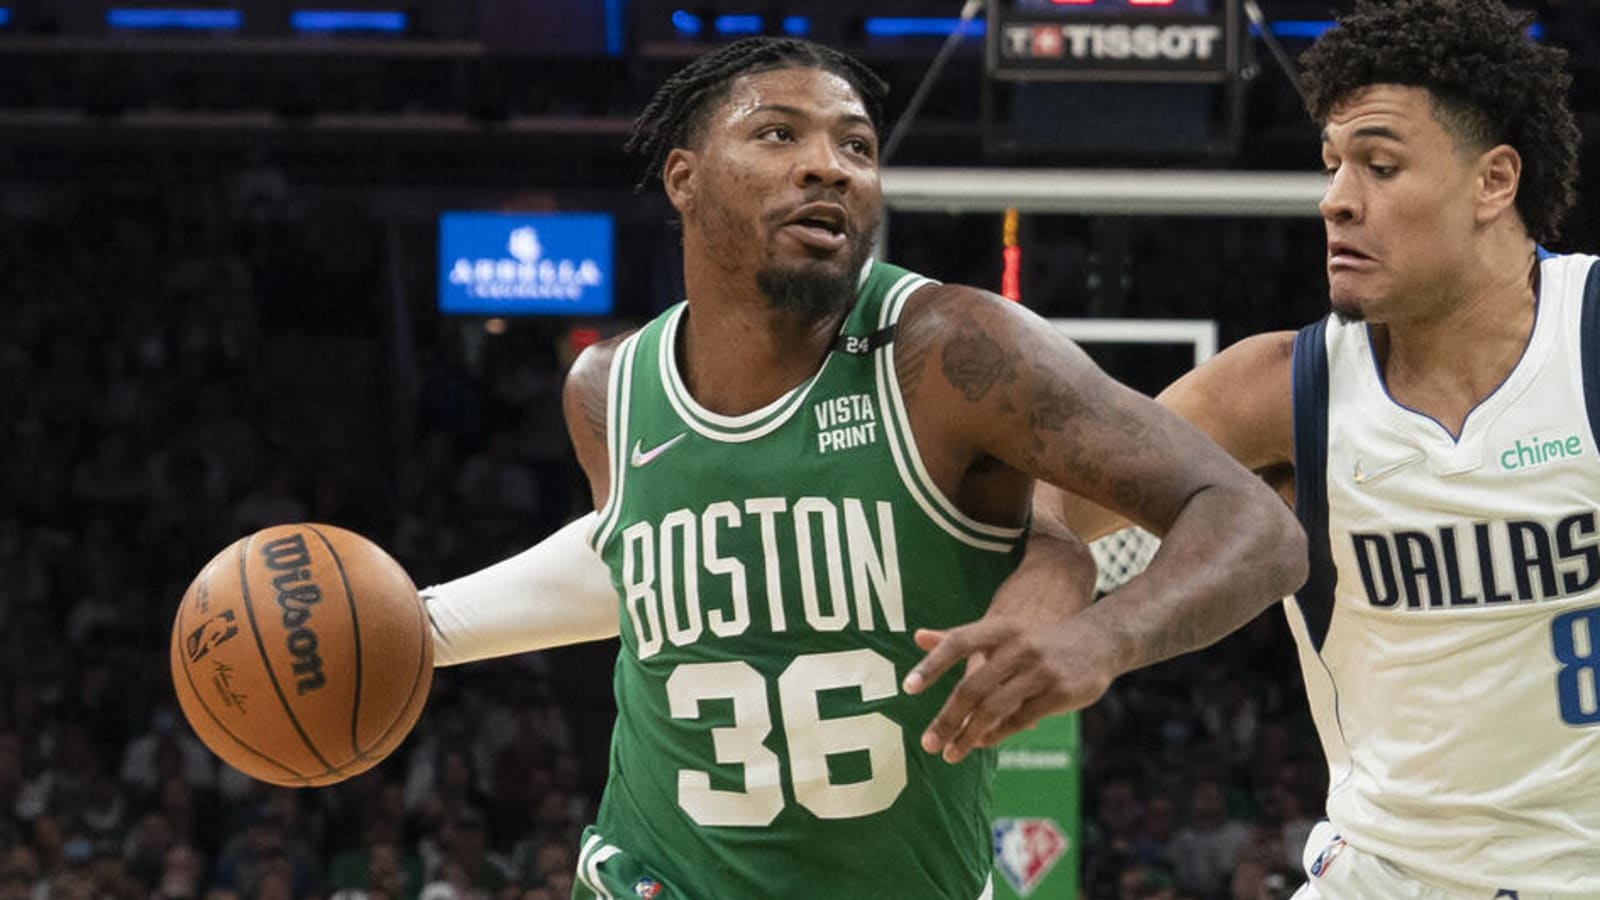 Marcus Smart responds to backlash over Steph Curry play